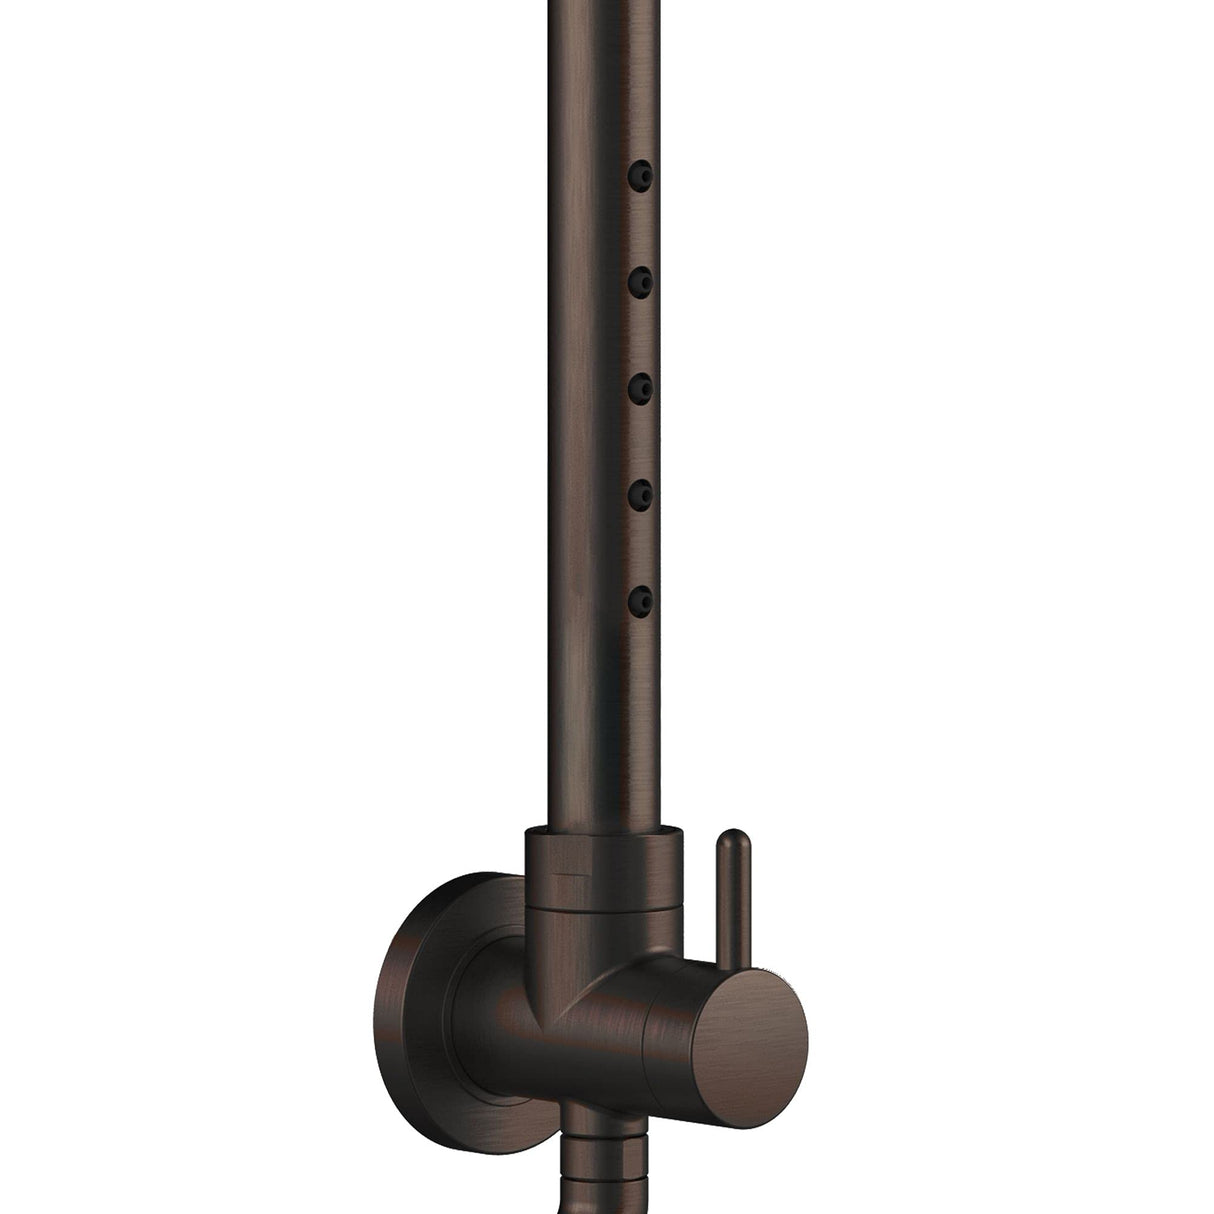 PULSE Showerspas 1059-ORB-1.8GPM Atlantis System with 10" Rain Showerhead, 5 Body Sprays and Hand Shower, Oil Rubbed Bronze, 1.8 GPM